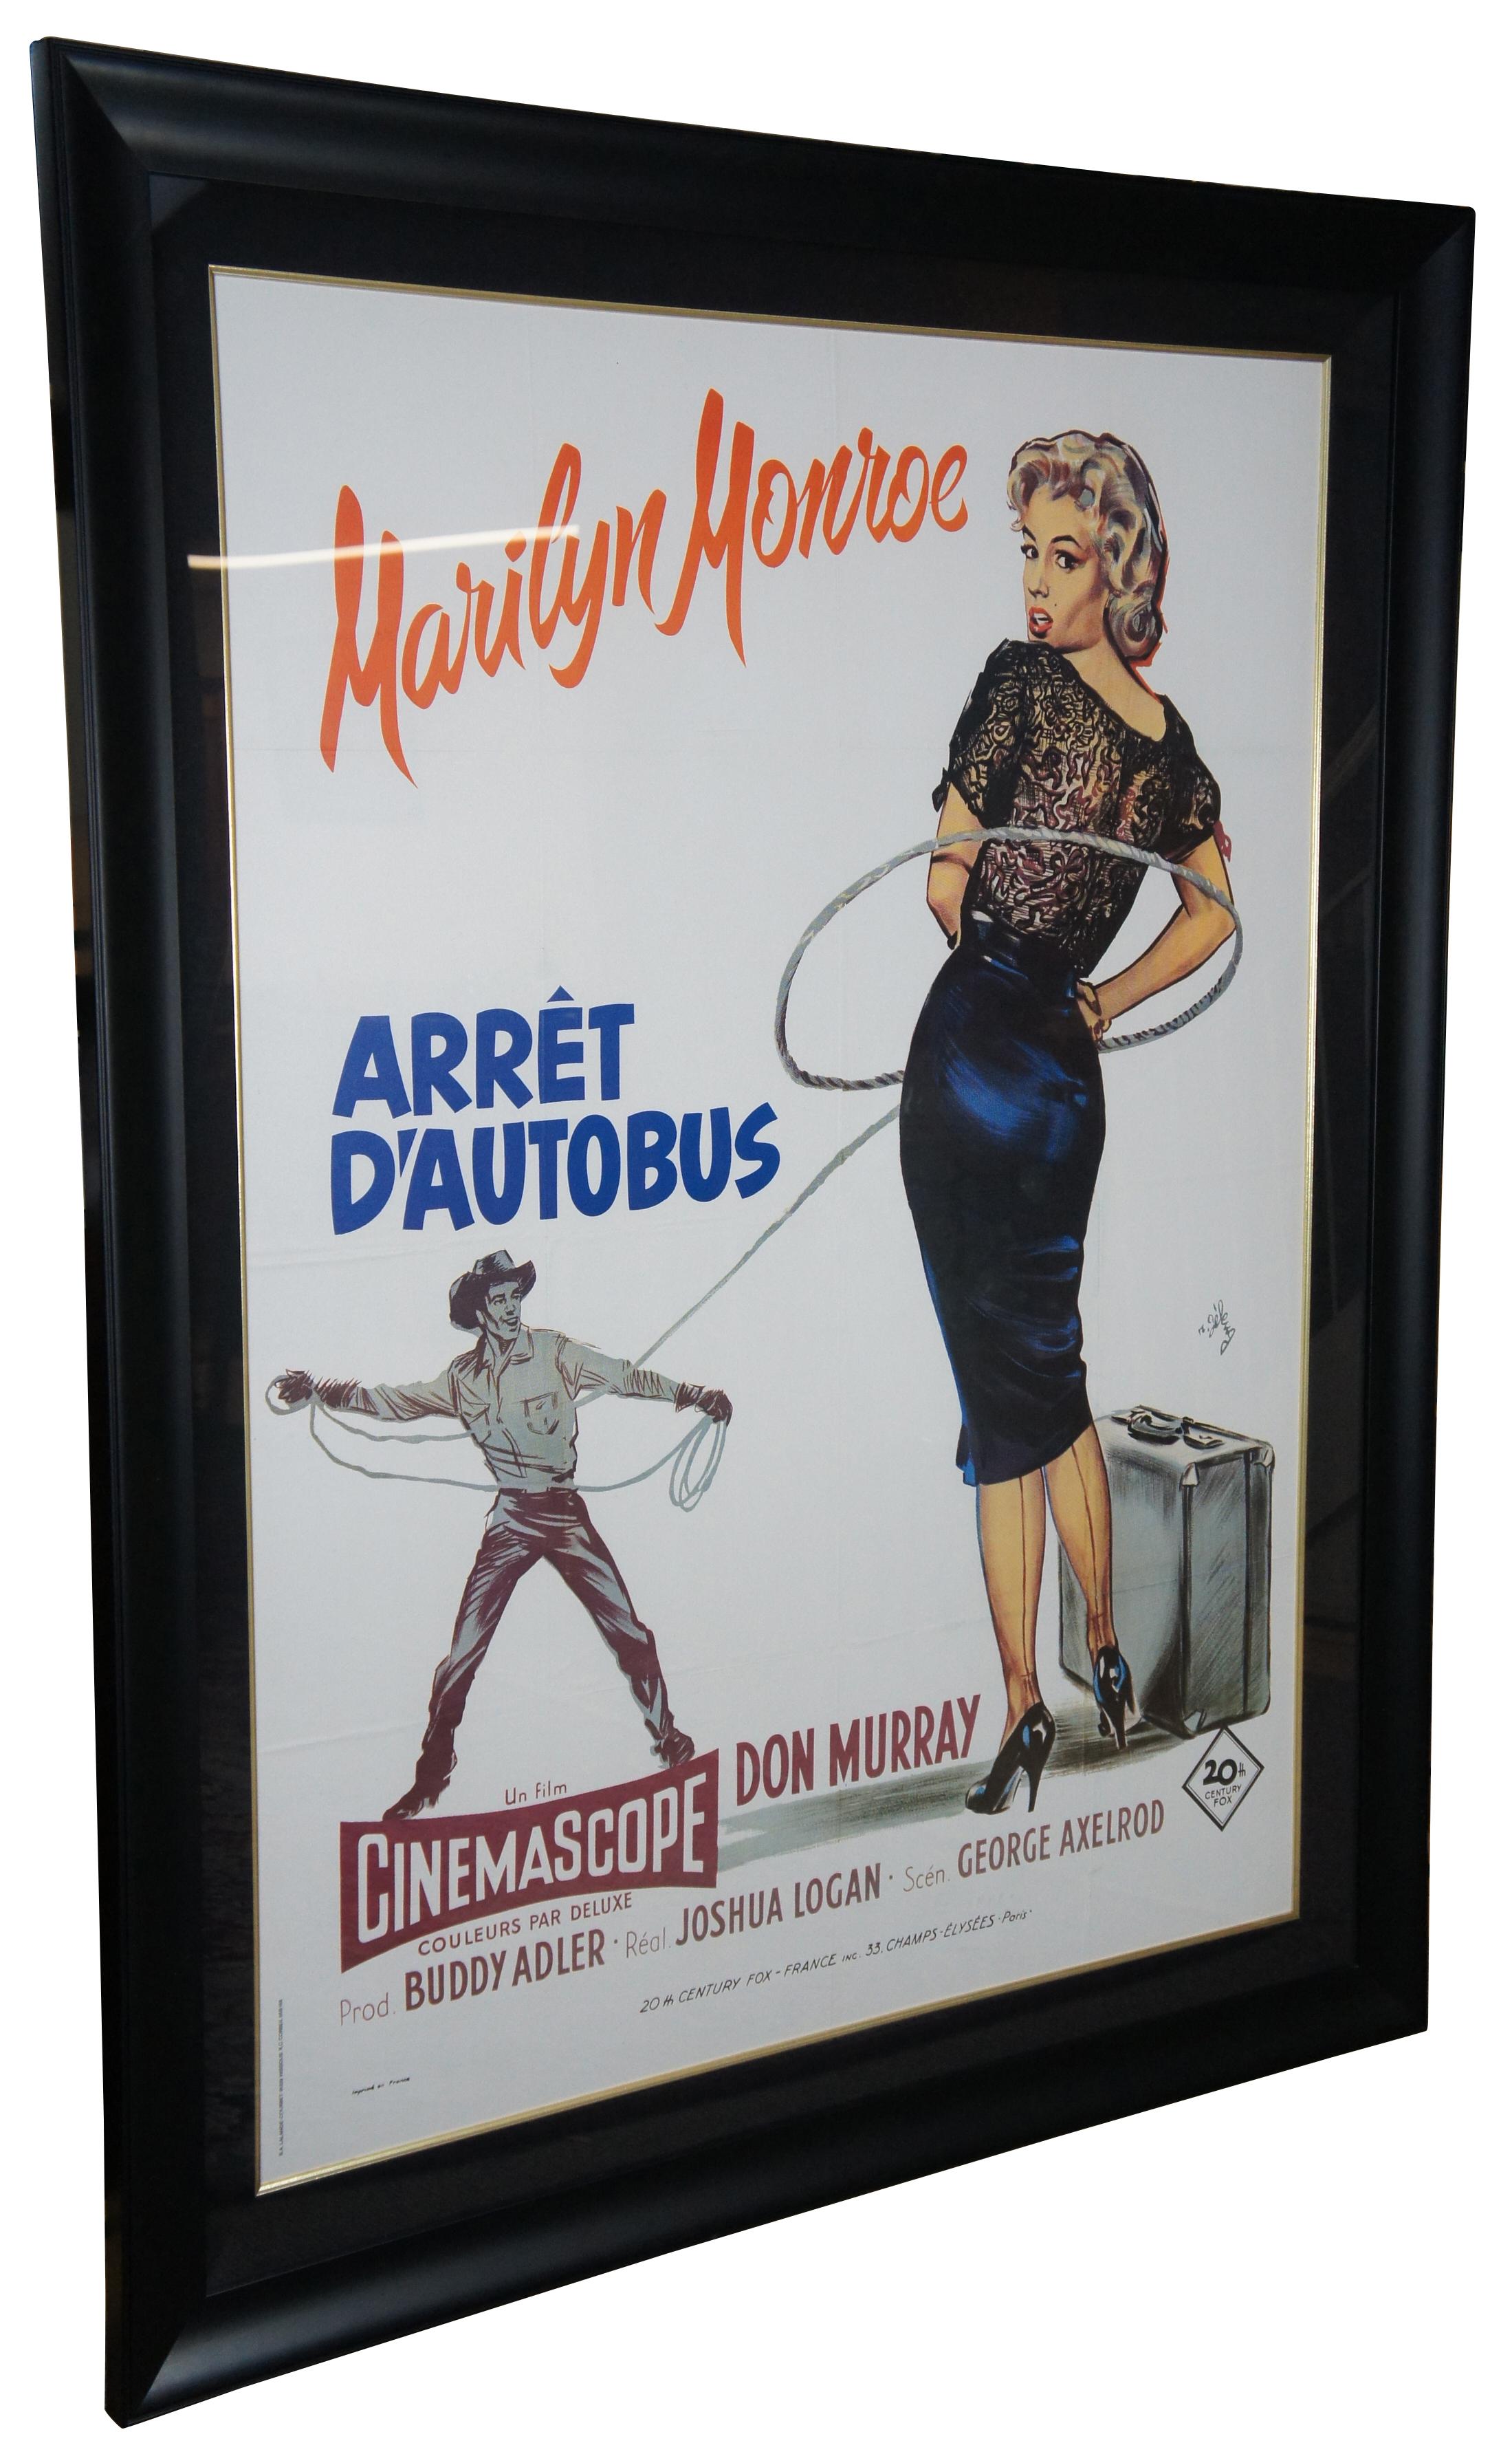 BUS STOP, 1956. Original French “Grande” Movie Poster from a re-release of the movie in the 1970s. The movie starts Marilyn Monroe, Don Murray, Arthur O’Connell, Betty Field, Eileen Heckart and was directed by Joshua Logan. Cowboy meets singer and